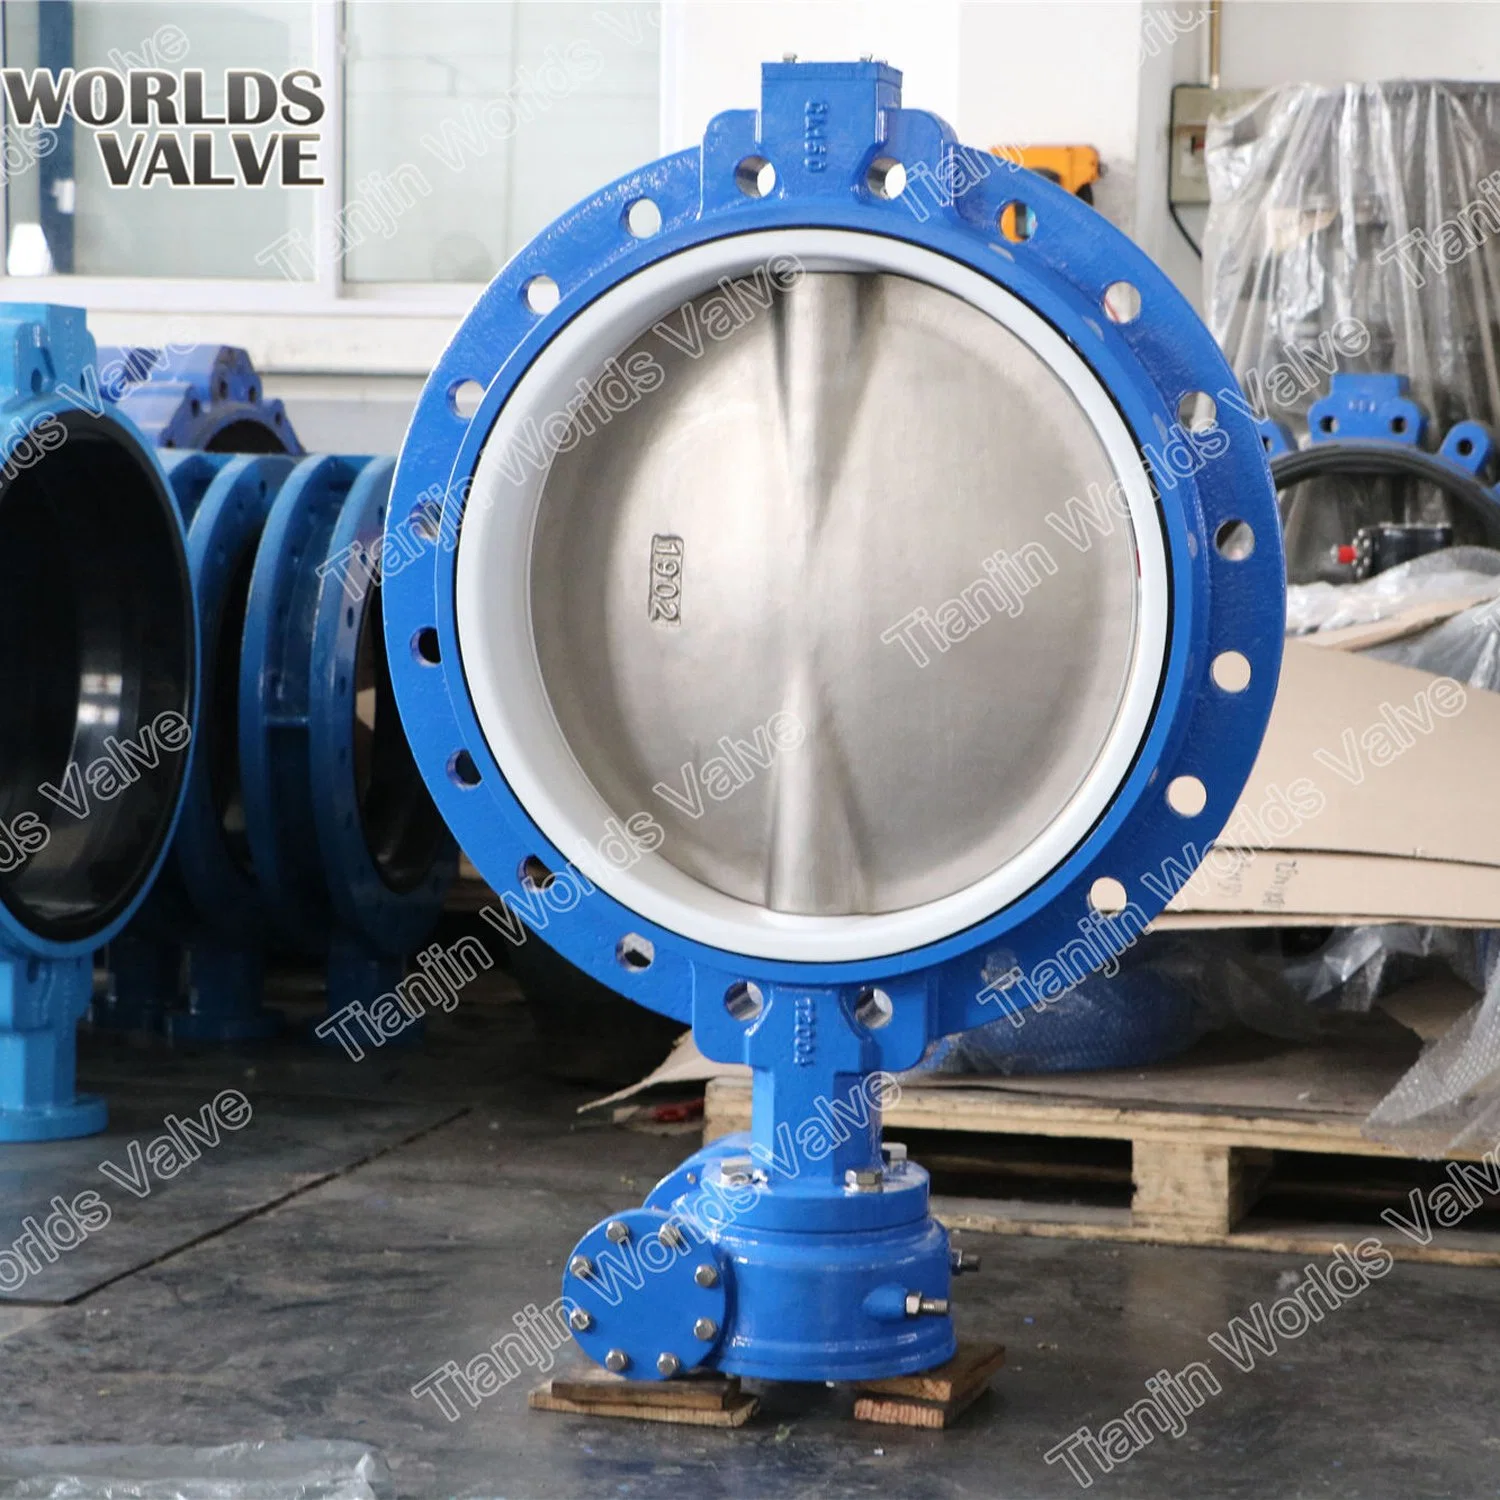 CF8 CF8m Disc PTFE Liner Seat Wafer Butterfly Valve One Piece Body